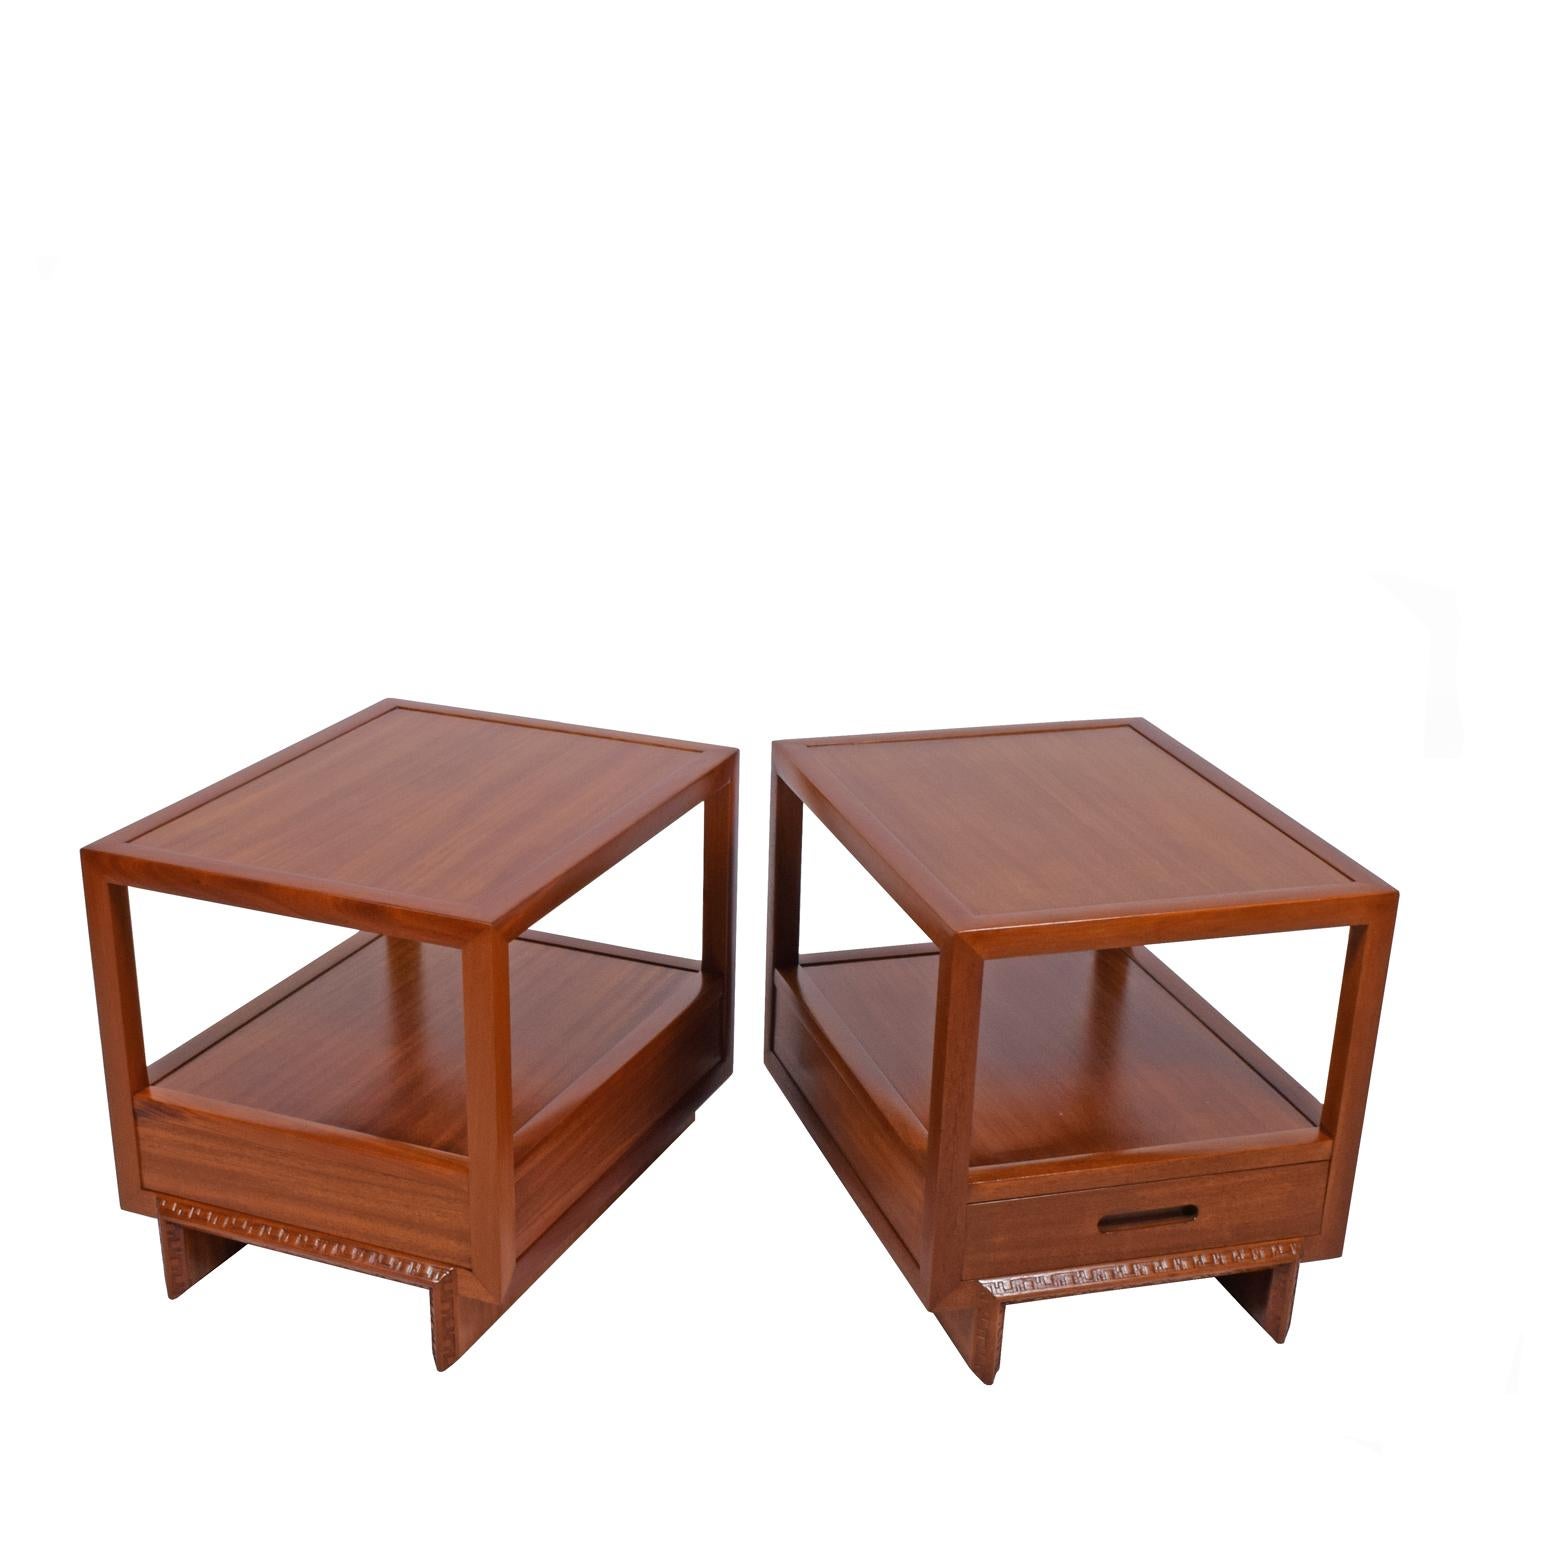 Modern Pair of Nightstands/Side Tables by Frank Lloyd Wright for Heritage Henredon